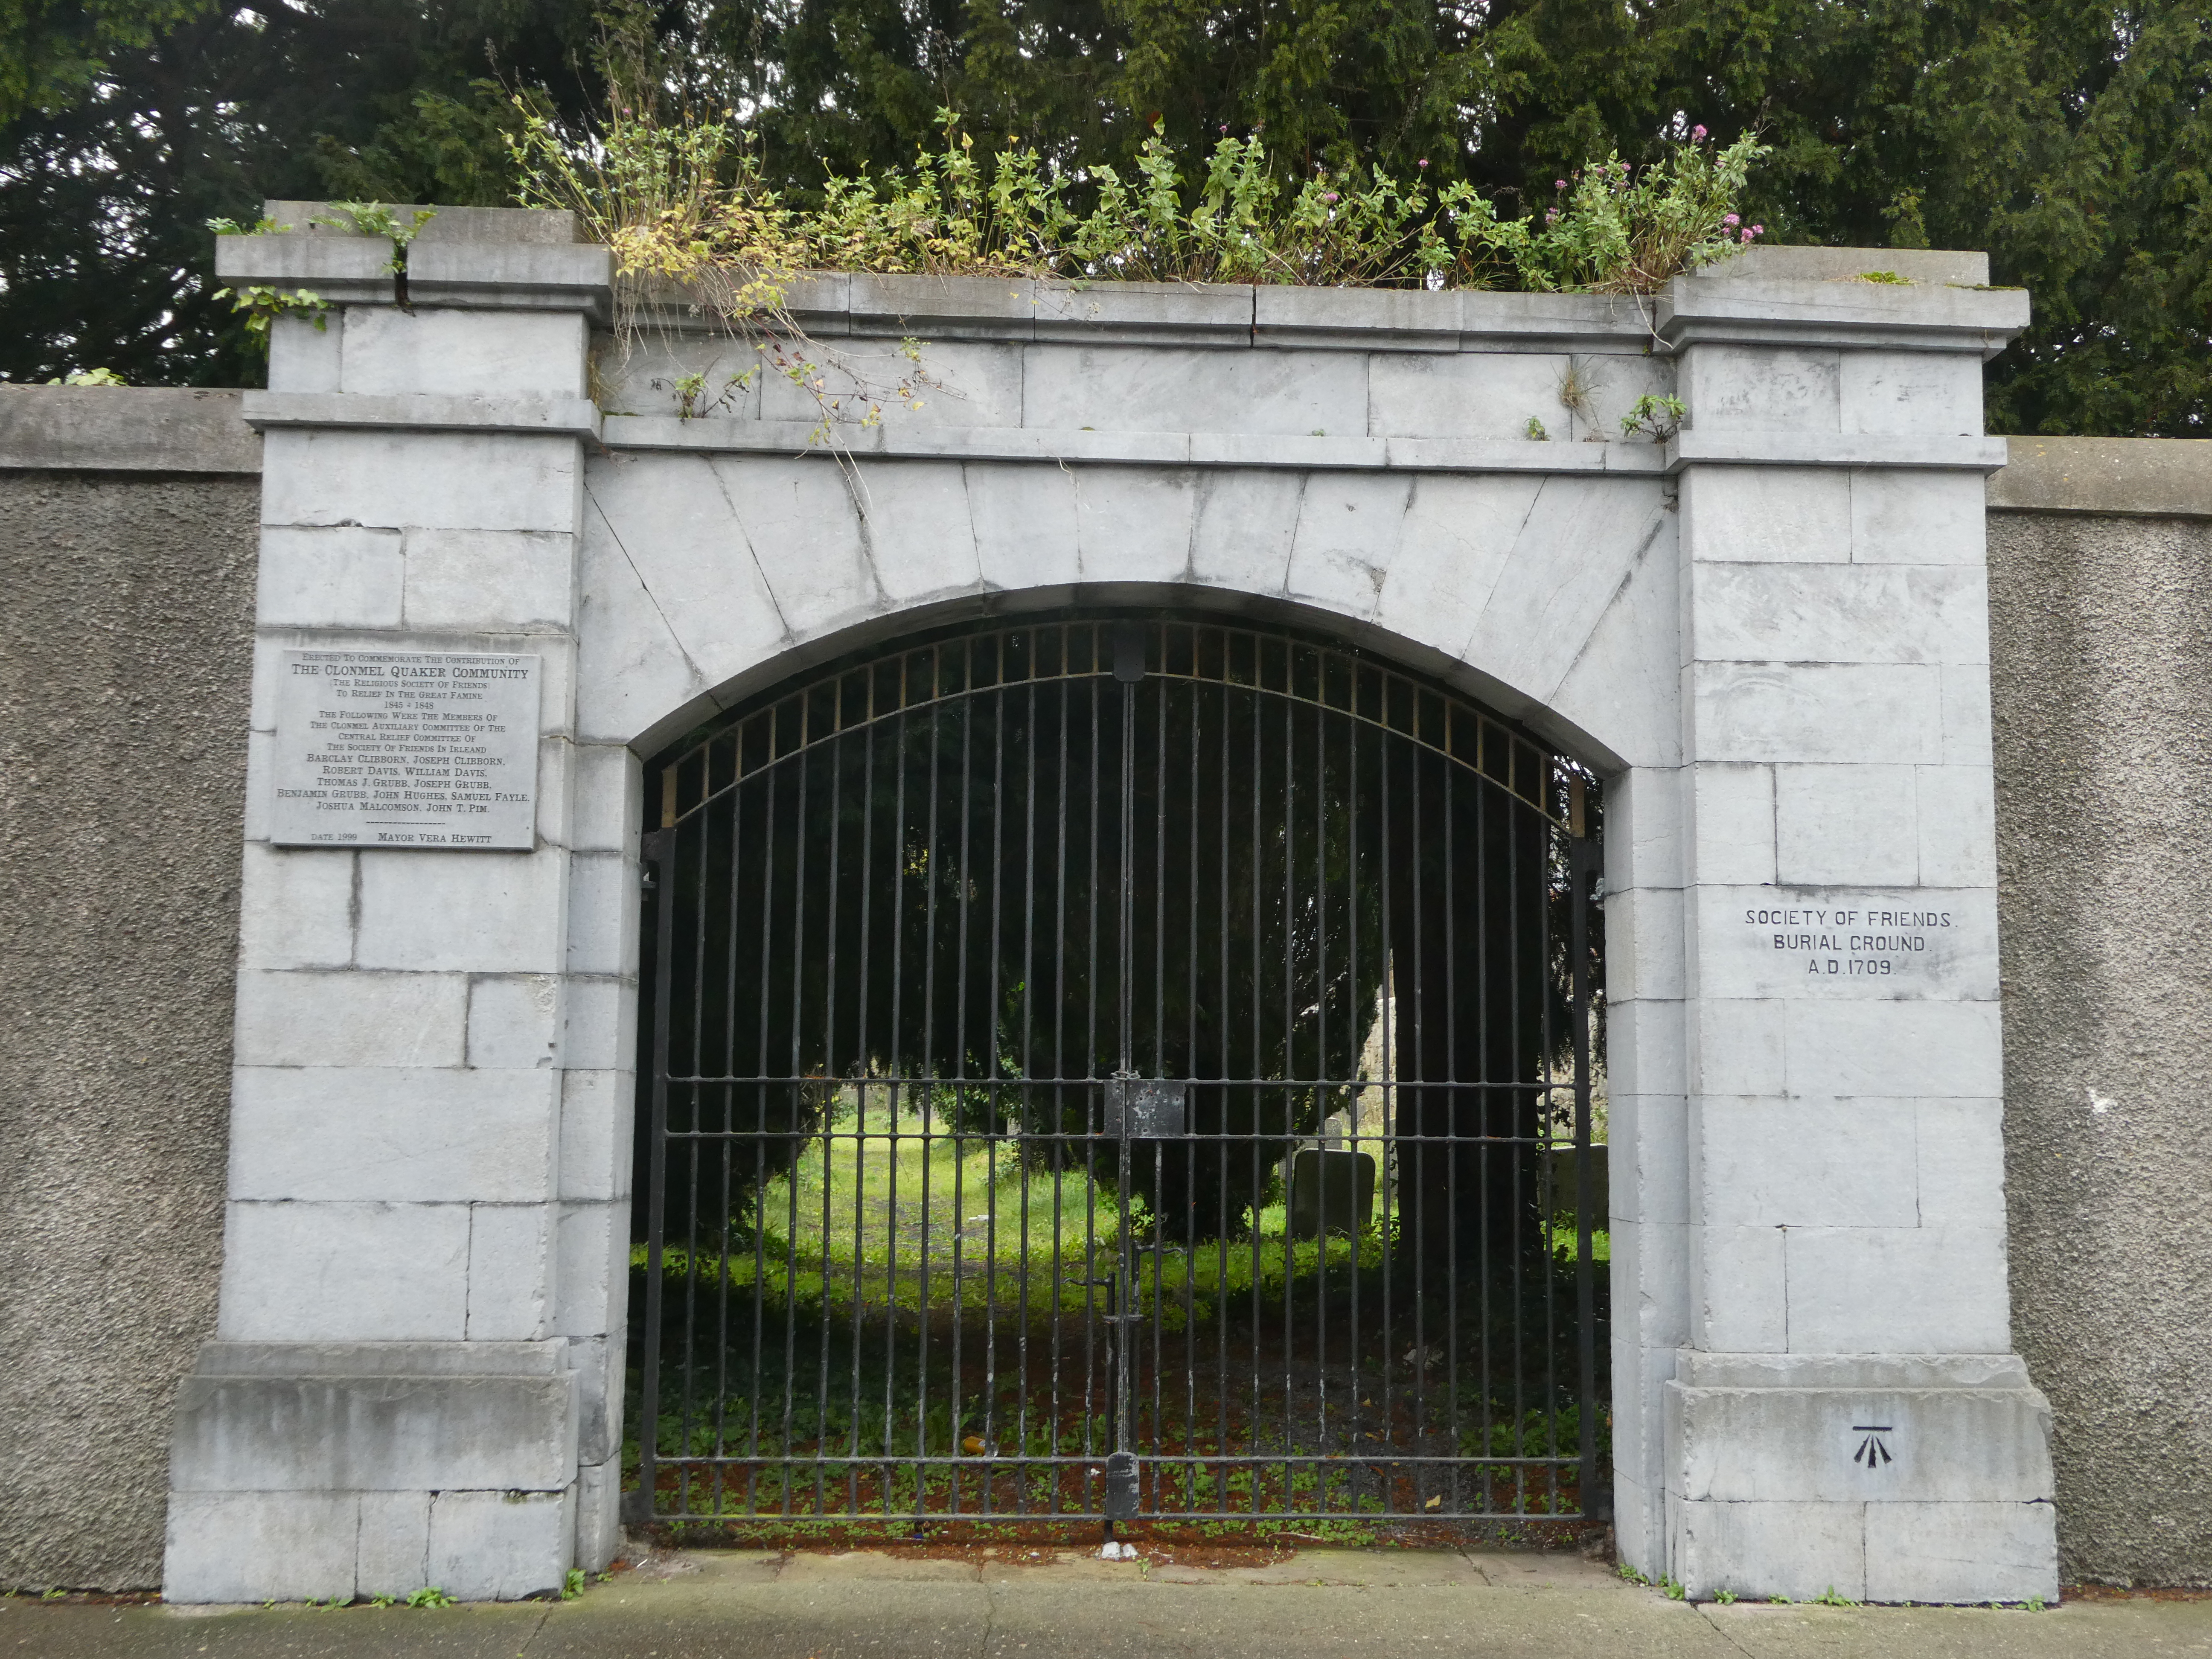 Entrance to the Quaker cemetery in Clonmel, Grubb's burial place